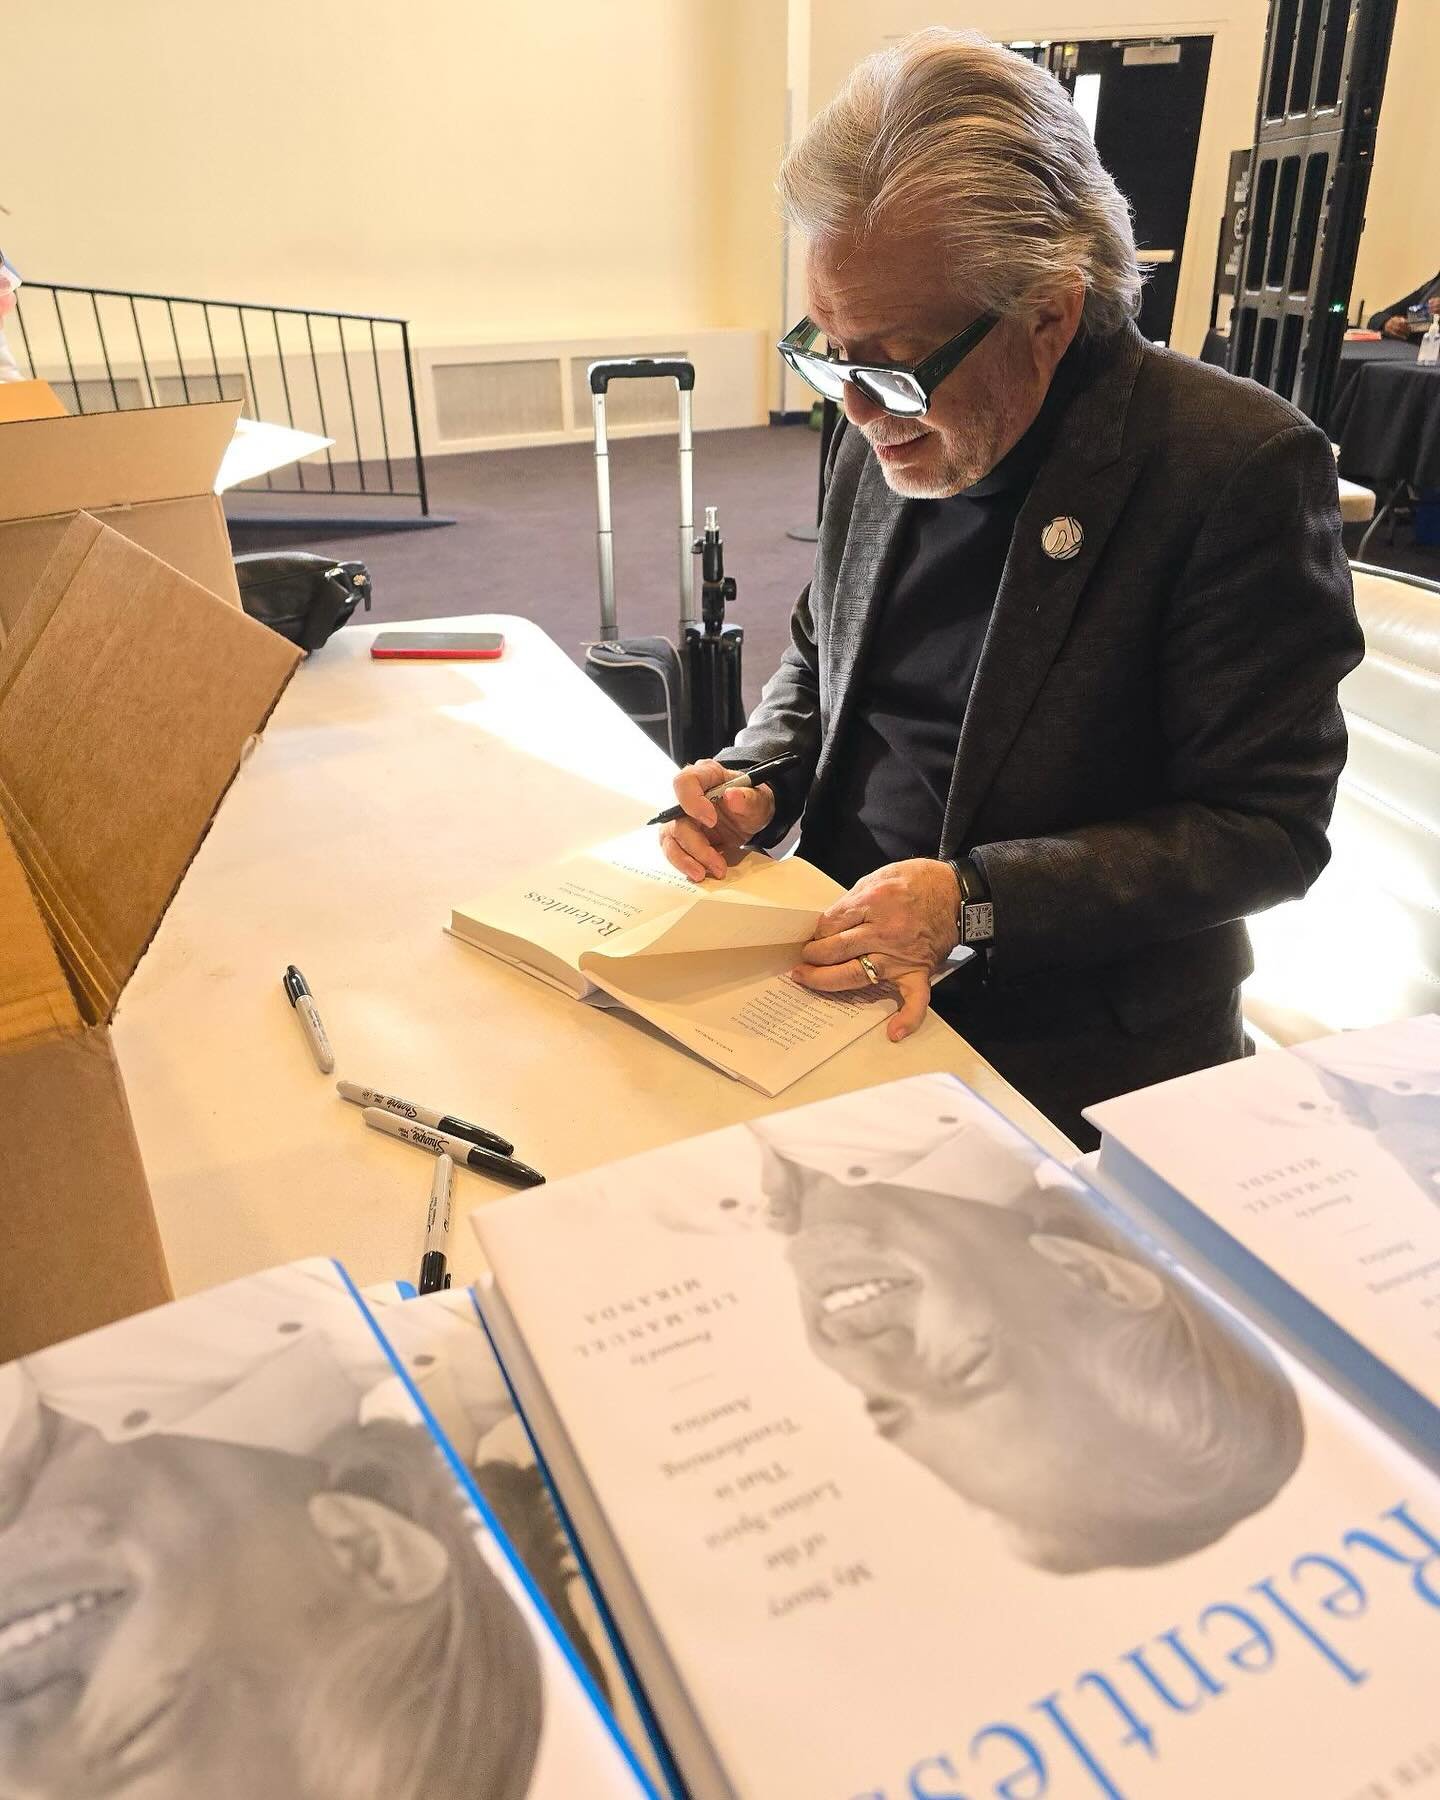 These days i spend a chunk of my time signing Relentlessthebook.com for events. Last night i was getting 250 books ready that will be given to the first 250 neighbors who come to United Palace on Tuesday to see Siempre, Luis and listen to me in conve